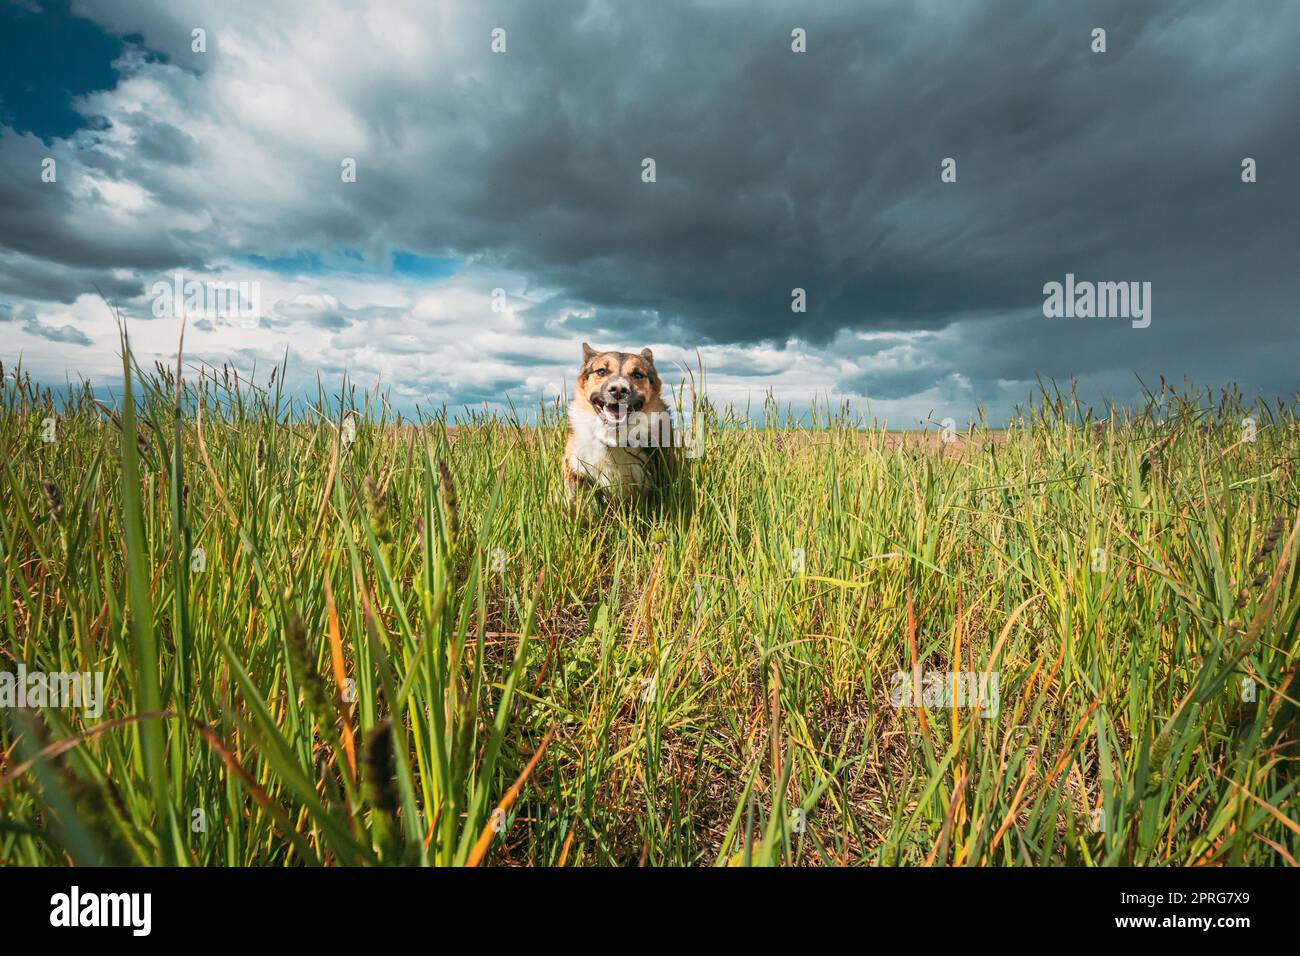 Angry Aggressive Mad Dog Running Outdoors In Green Meadow On Camera Stock Photo